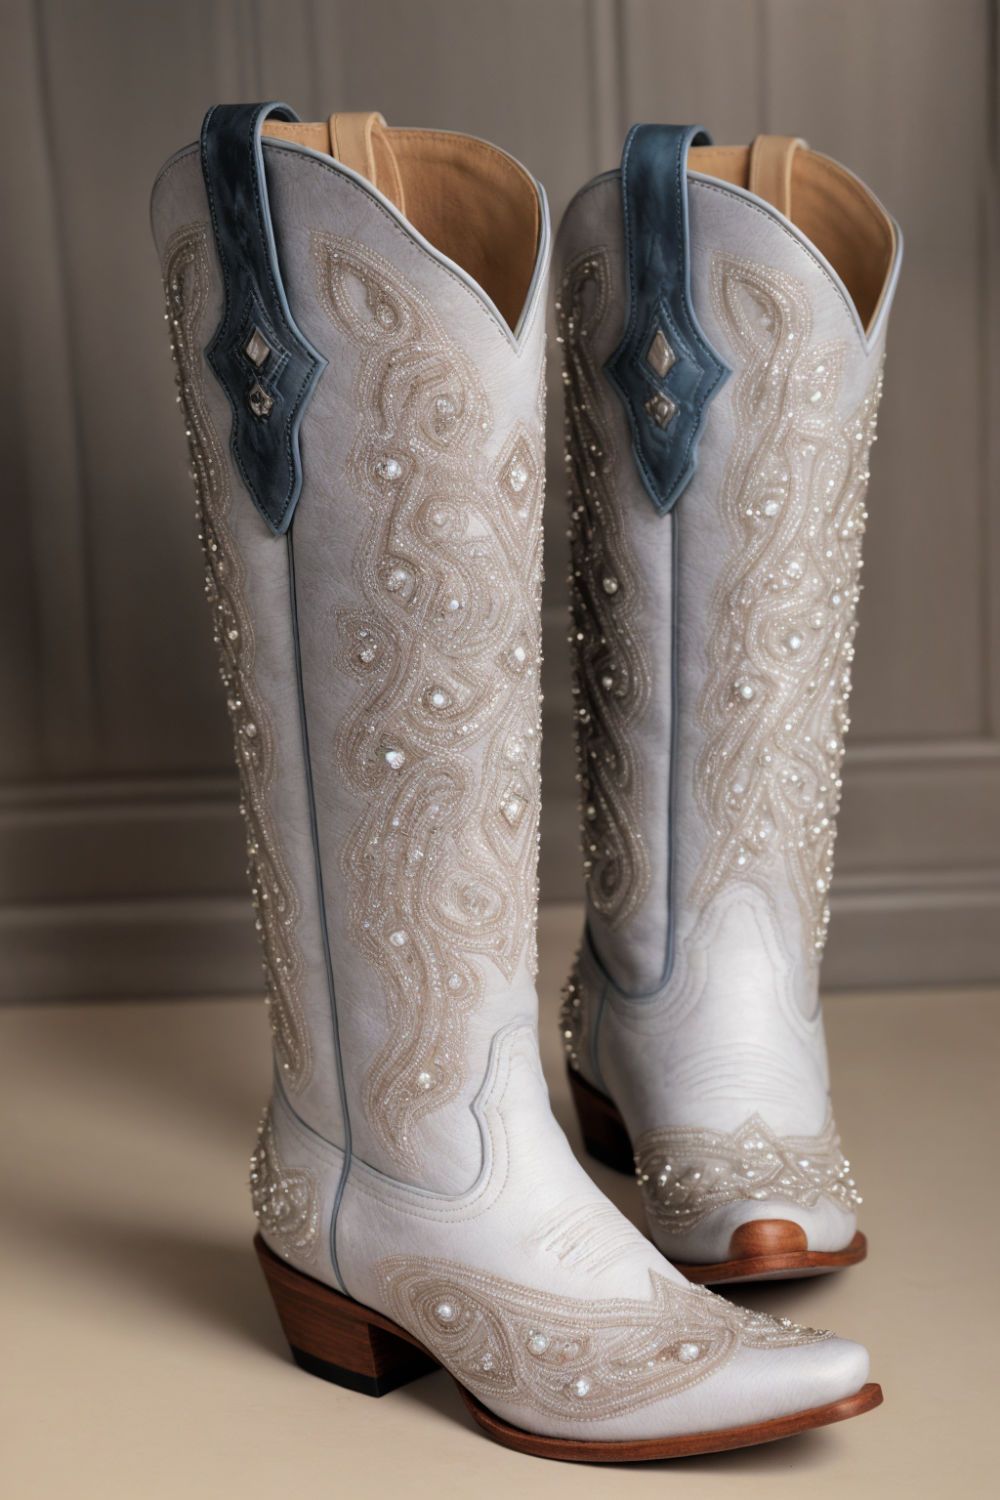 traditional embellished cowboy boots